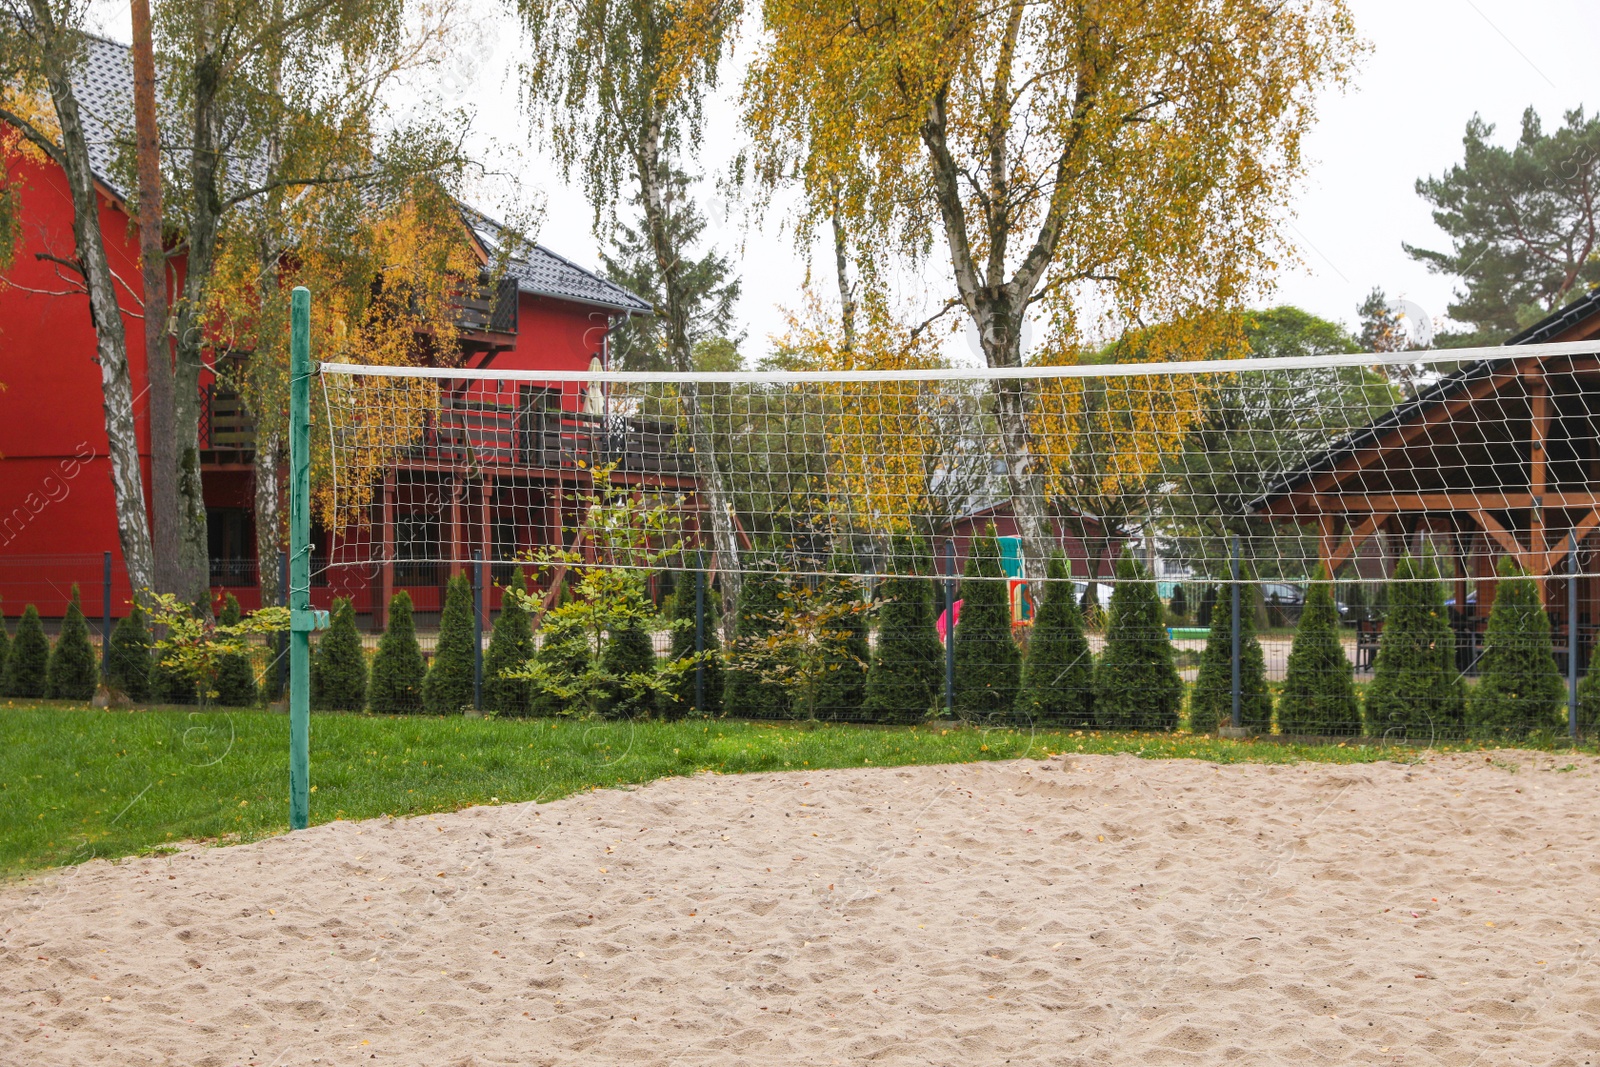 Photo of Sand volleyball court with net near trees and buildings